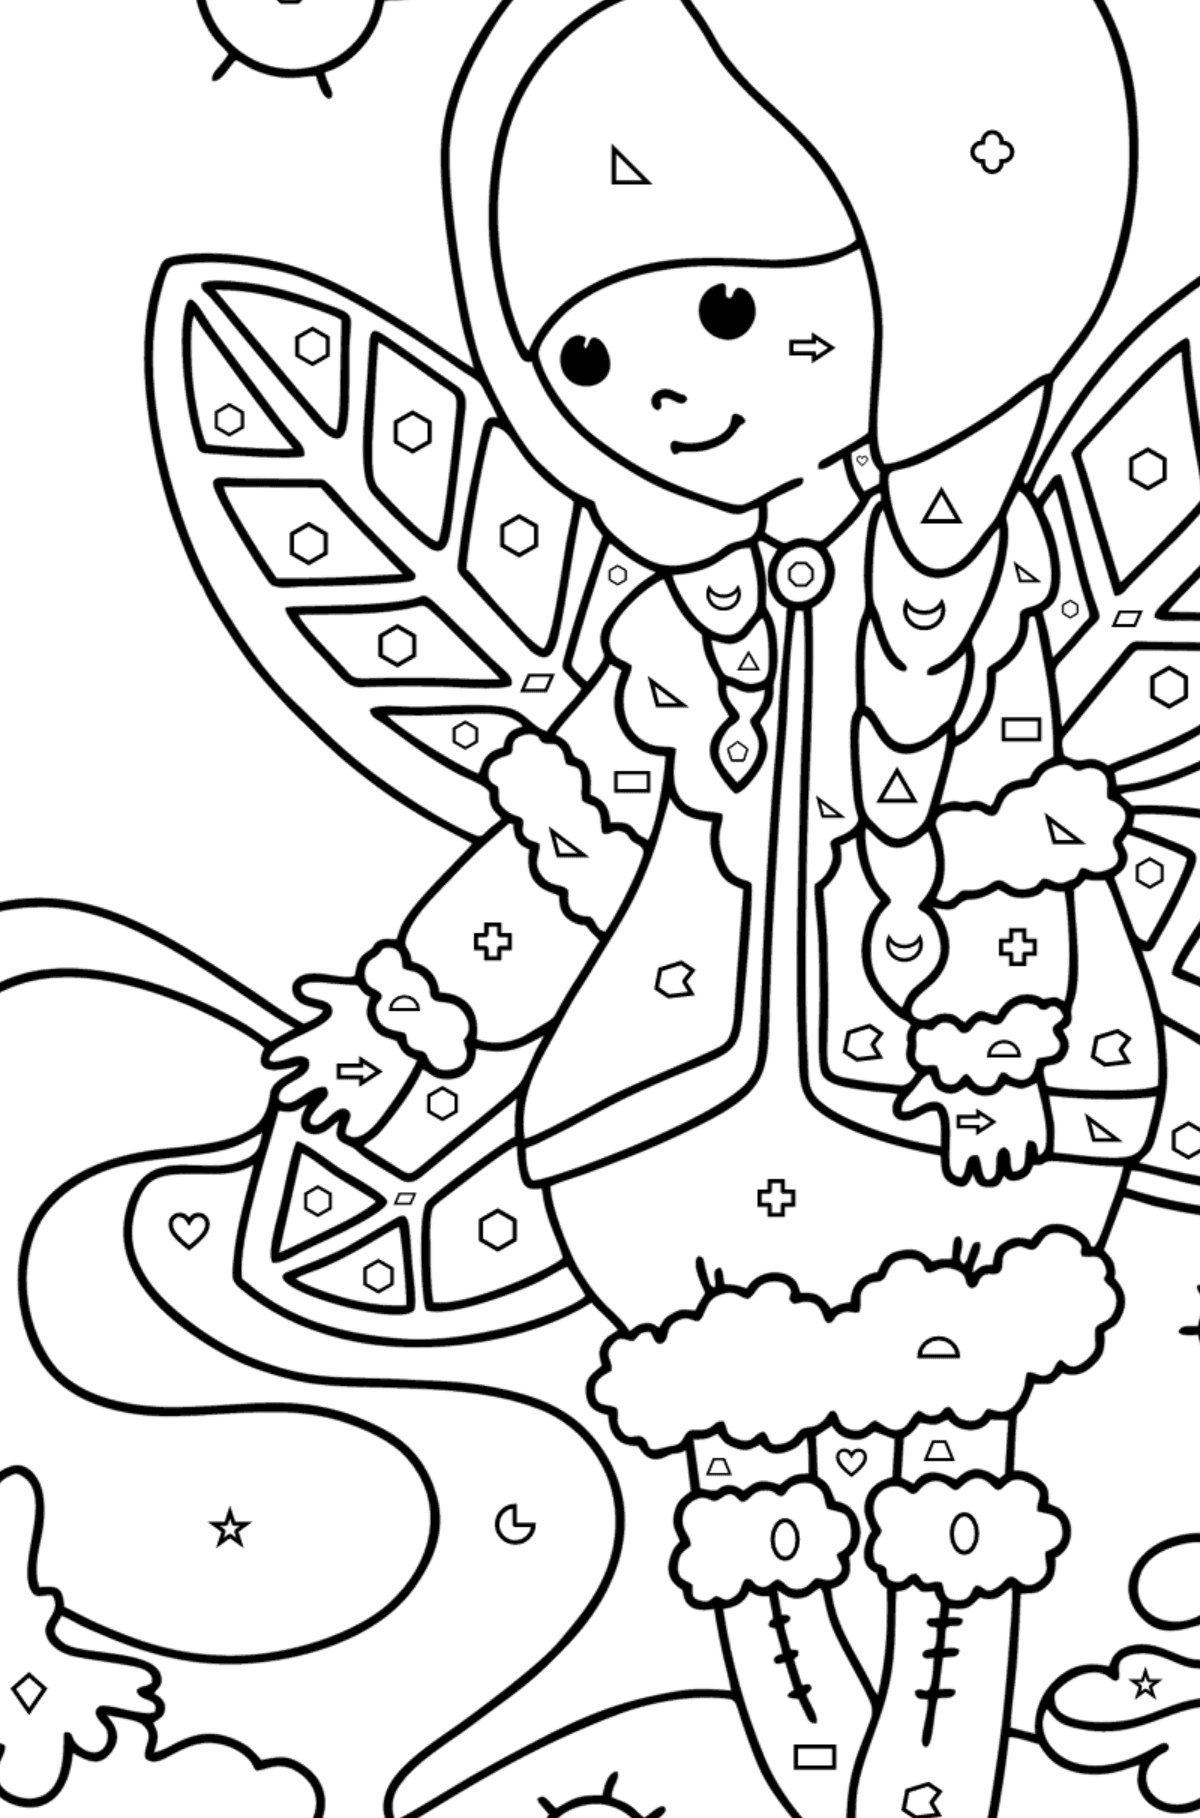 Winter Fairy coloring page - Coloring by Geometric Shapes for Kids